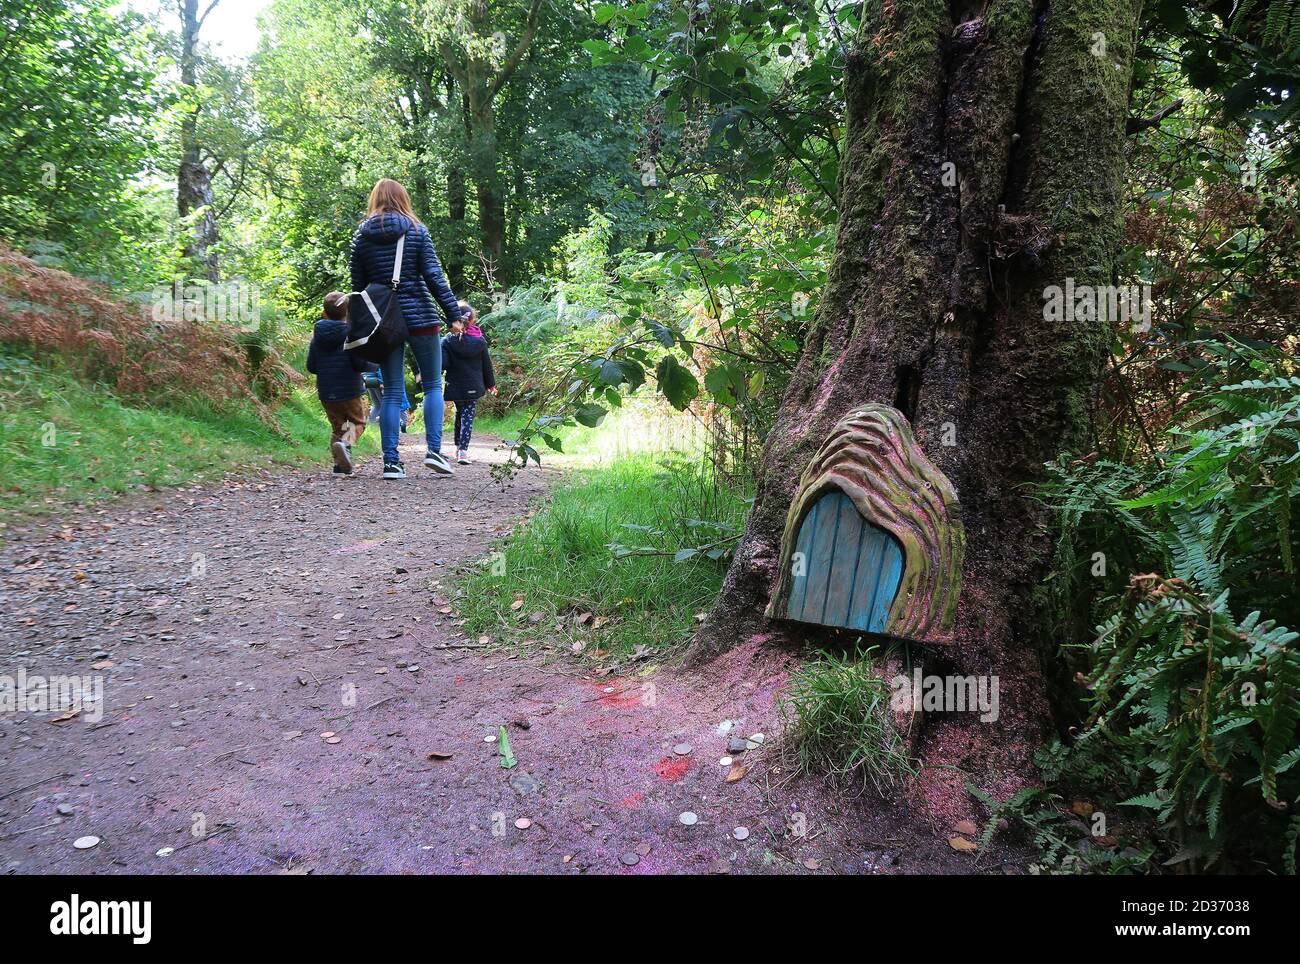 Fairy houses along the Faerie Trail at Loch Lomond in Scotland Stock Photo